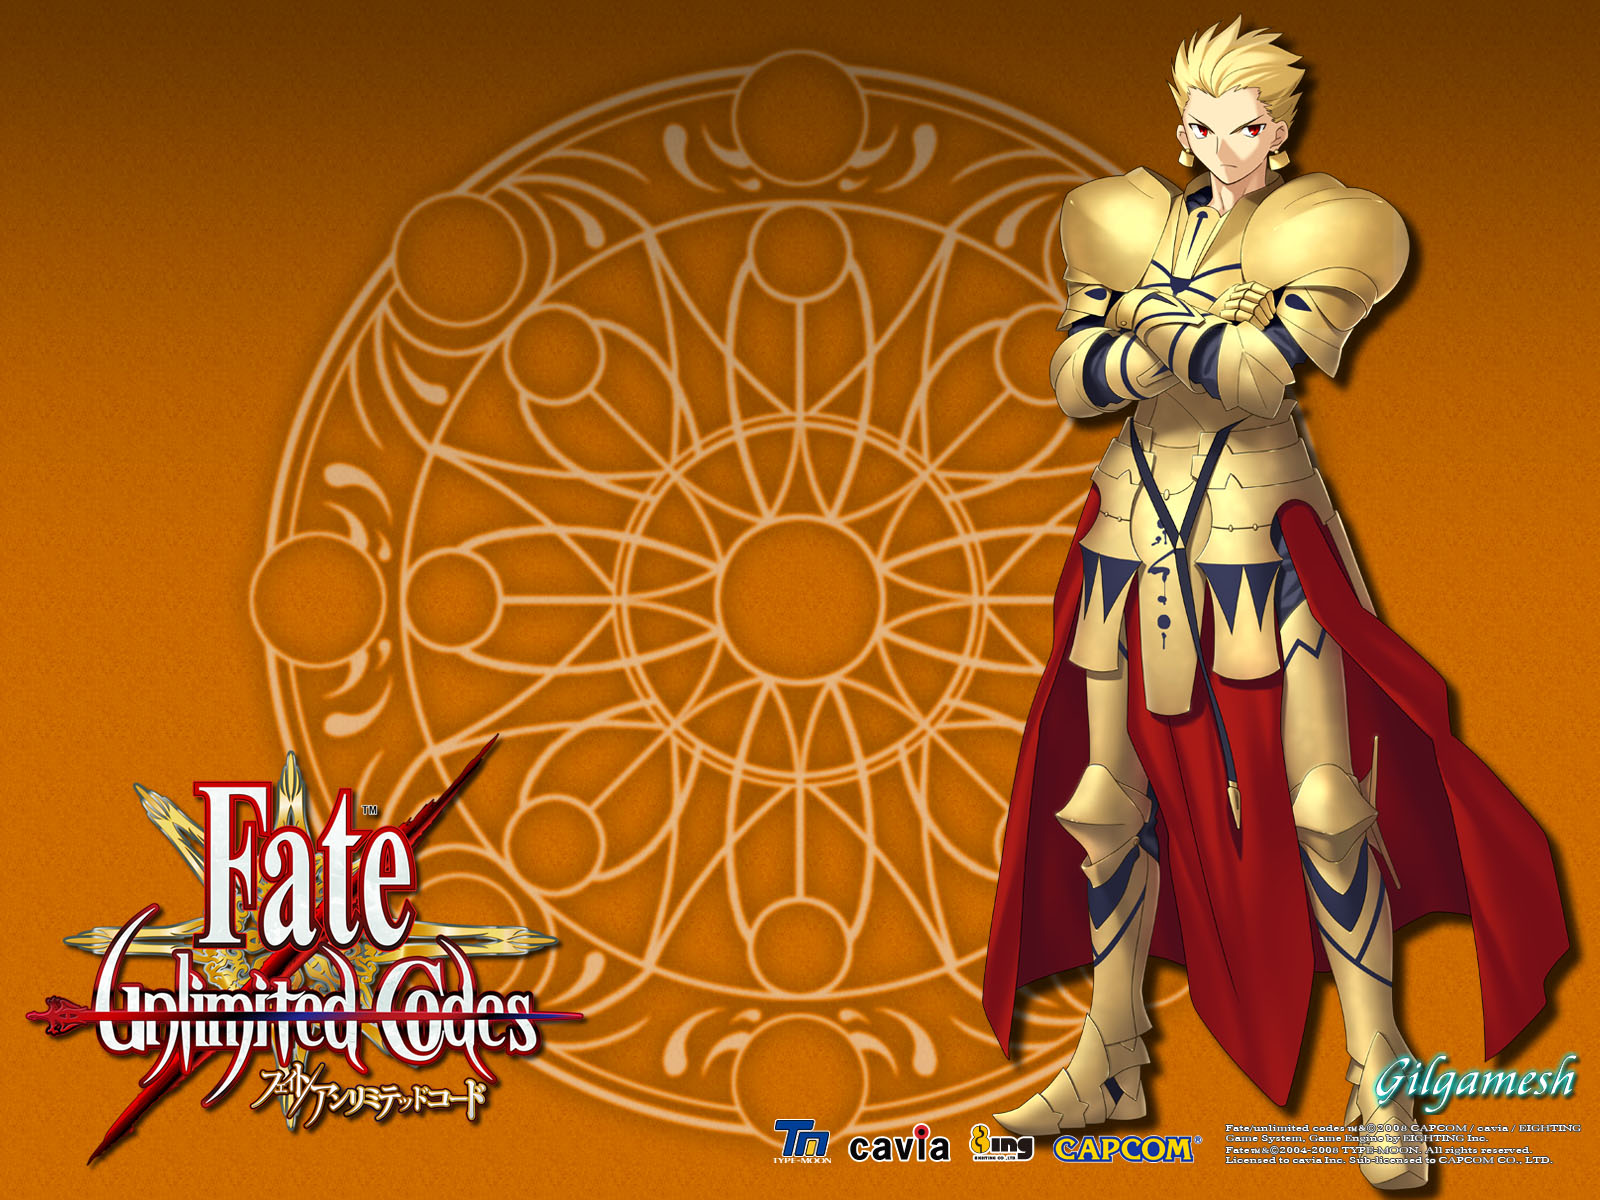 Fate unlimited codes 壁纸8